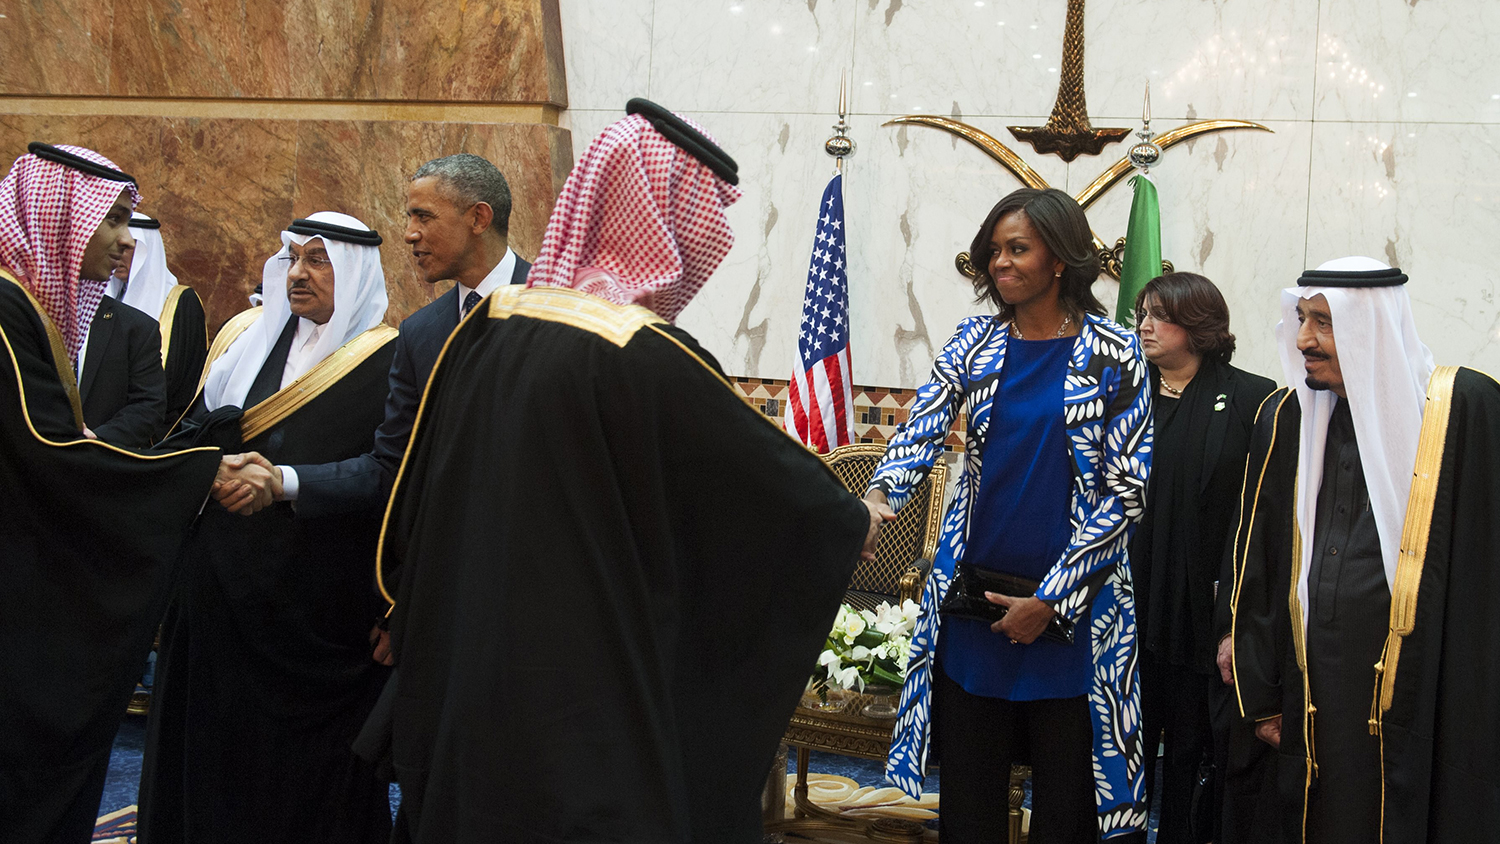 Saudi new King Salman (R), US President Barack Obama (3rd from L) and First Lady Michelle Obama (3rd from R) hold a receiving line for delegation members at the Erga Palace in the capital Riyadh on January 27, 2015.
